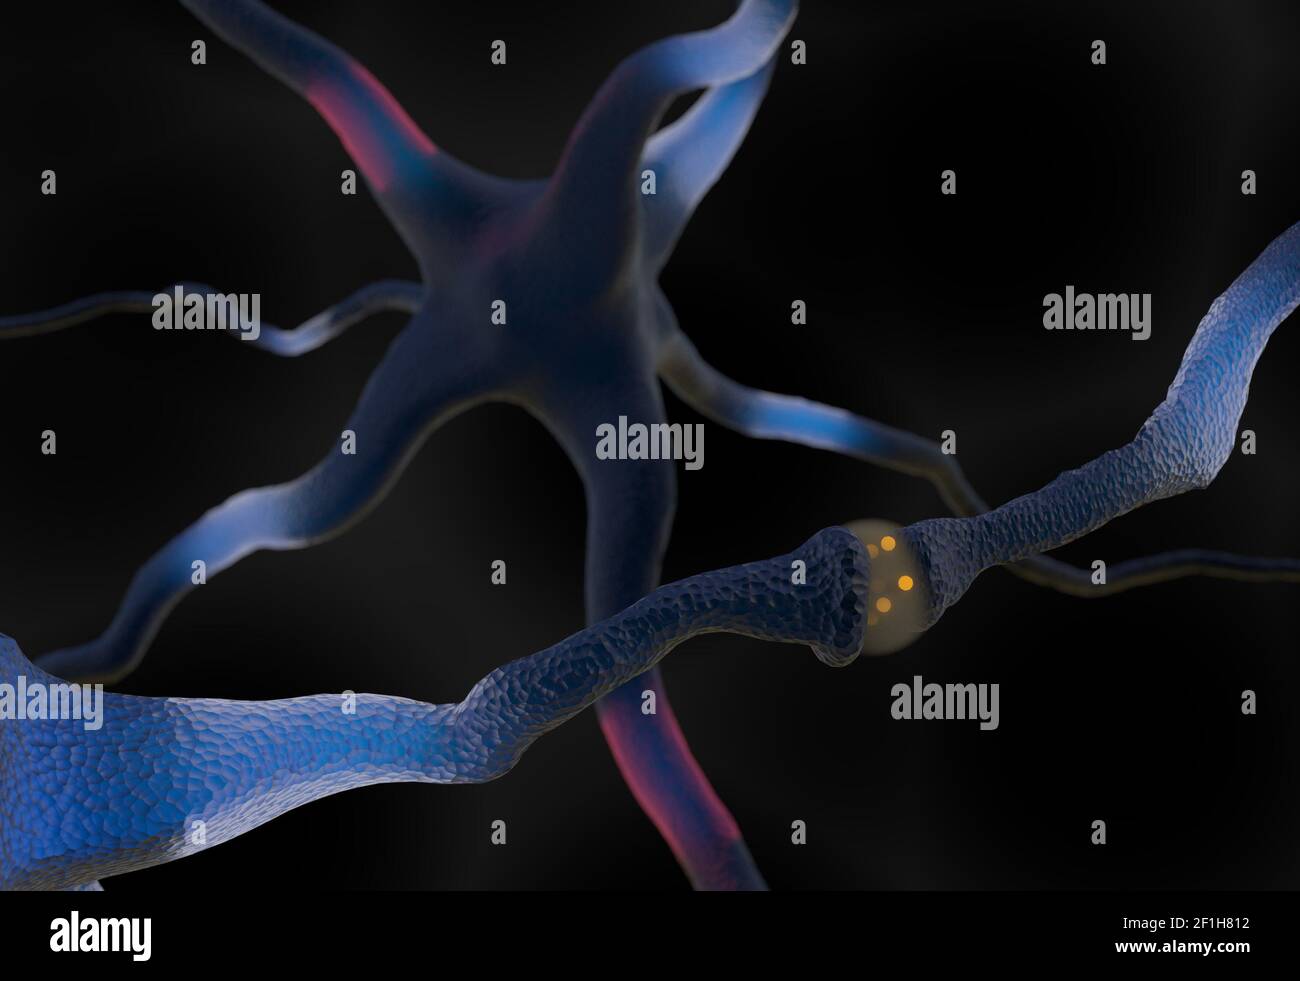 Synapse and neuron cells sending electrical signals 3d illustration Stock Photo